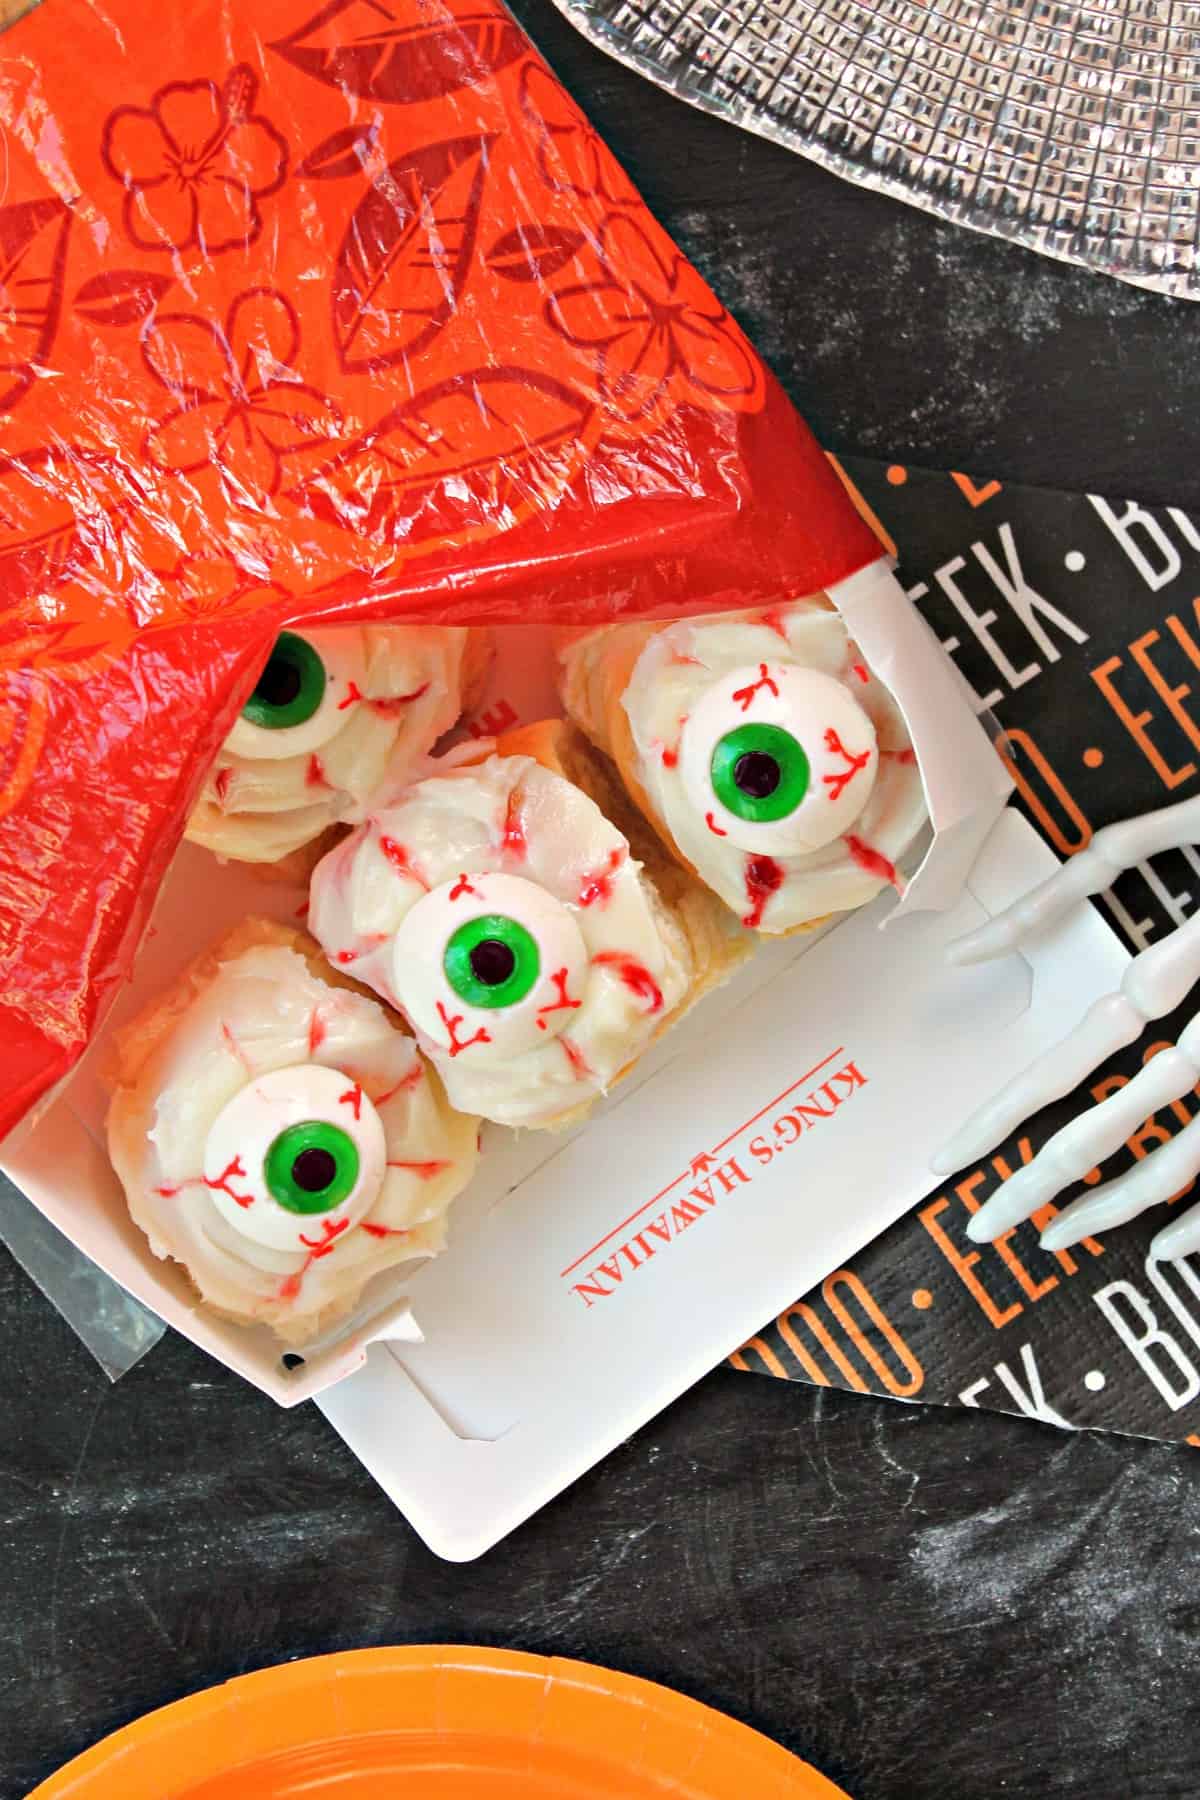 Spooky Eyeball Sweet Rolls! Need something quick and easy to make for Halloween festivities? These ooey, gooey, no-bake sweet rolls come together quickly with the help of King's Hawaiian Dinner Rolls! Filled with raspberry jam and topped with a creamy glaze and gummy eyeballs, they'll become your family's favorite creepy treat! 